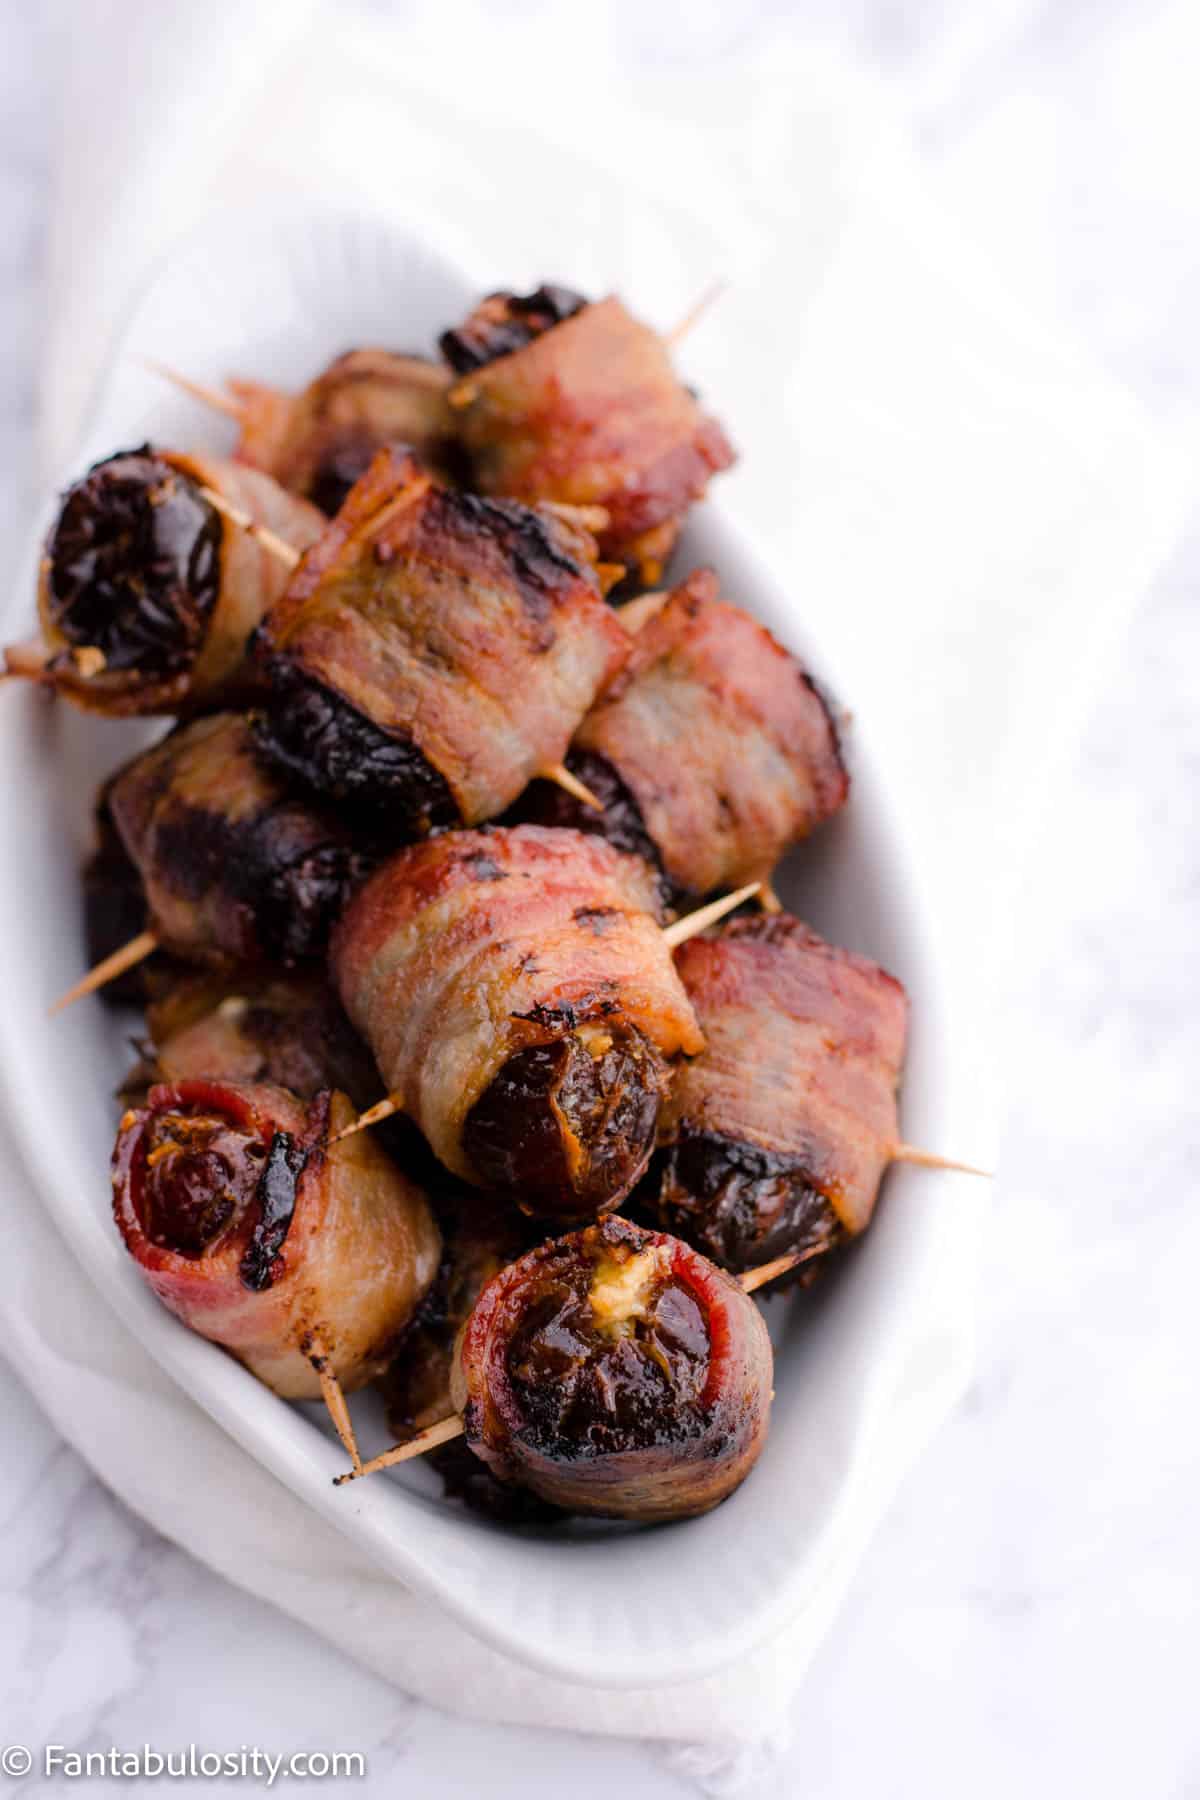 Bacon wrapped dates piled up in white dish